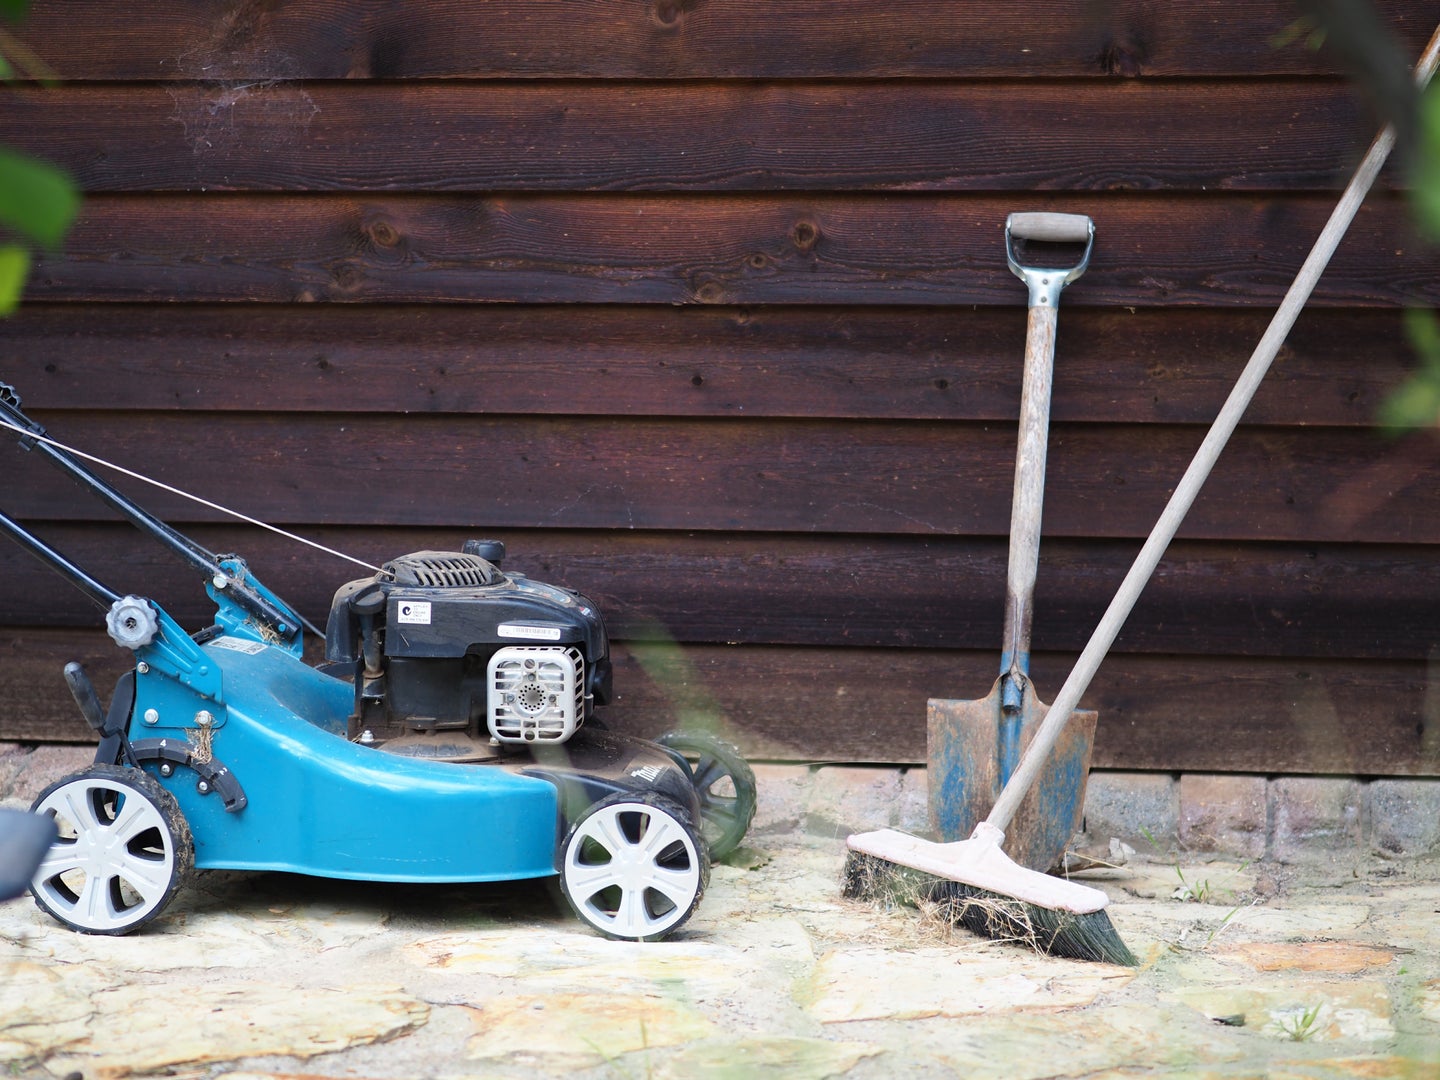 A lawnmower, which you won't really need for a ground cover lawn, with a shovel and a broom for digging up your grass lawn.